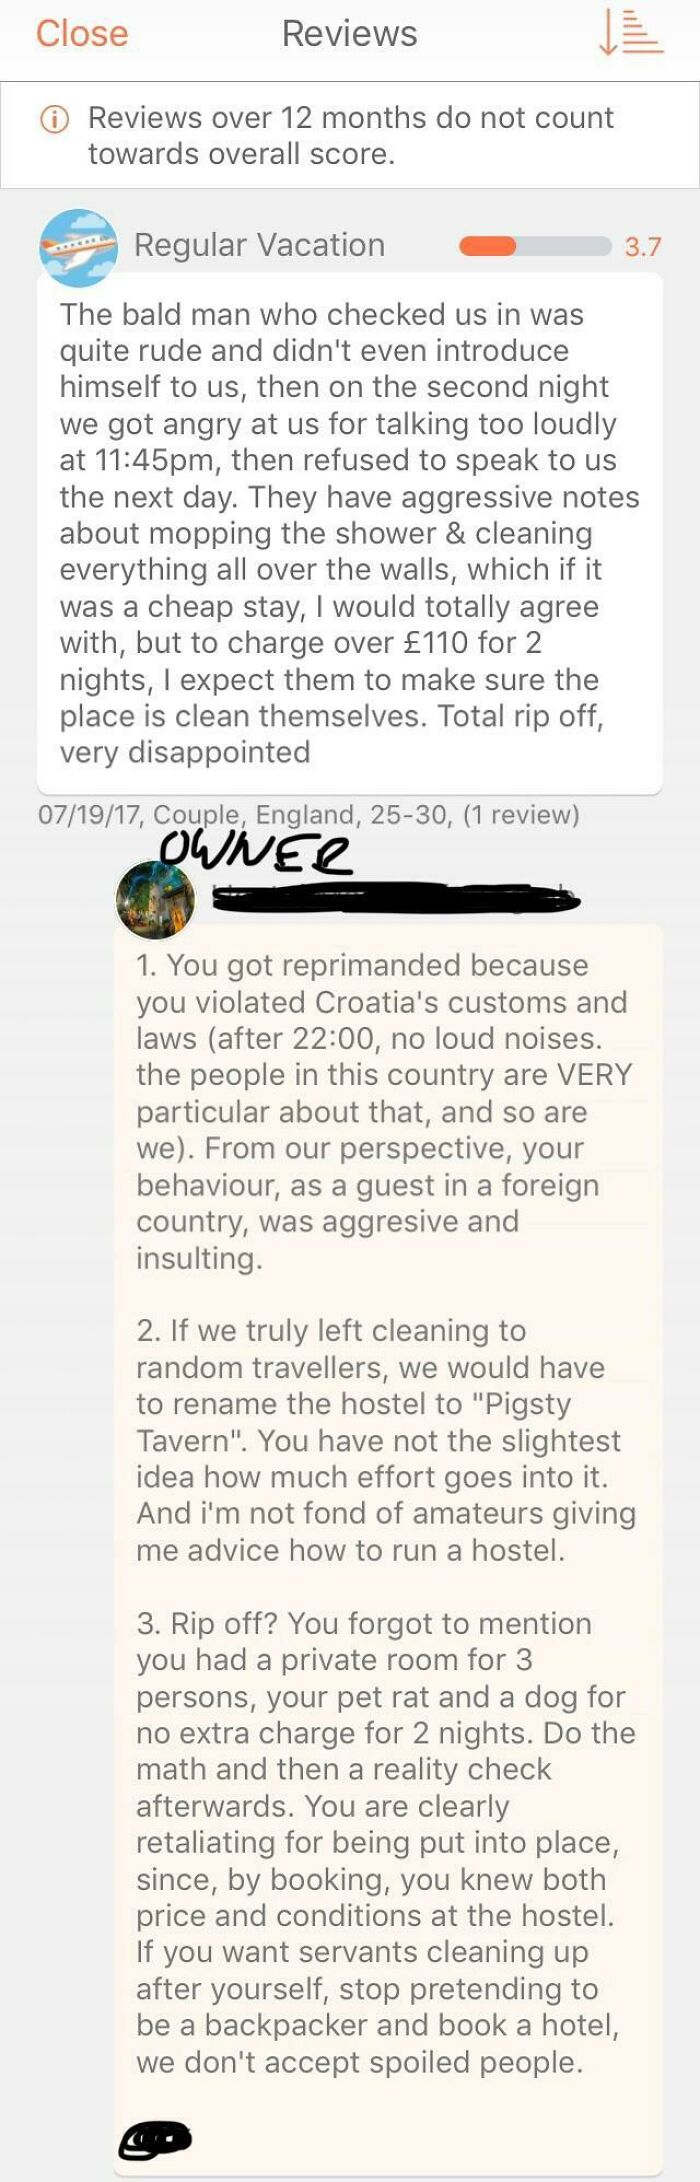 Checked To See If The Wonderful Hostel I’m Staying At Has Any Bad Reviews. They Do, And The Owner Responds So Well Lol.